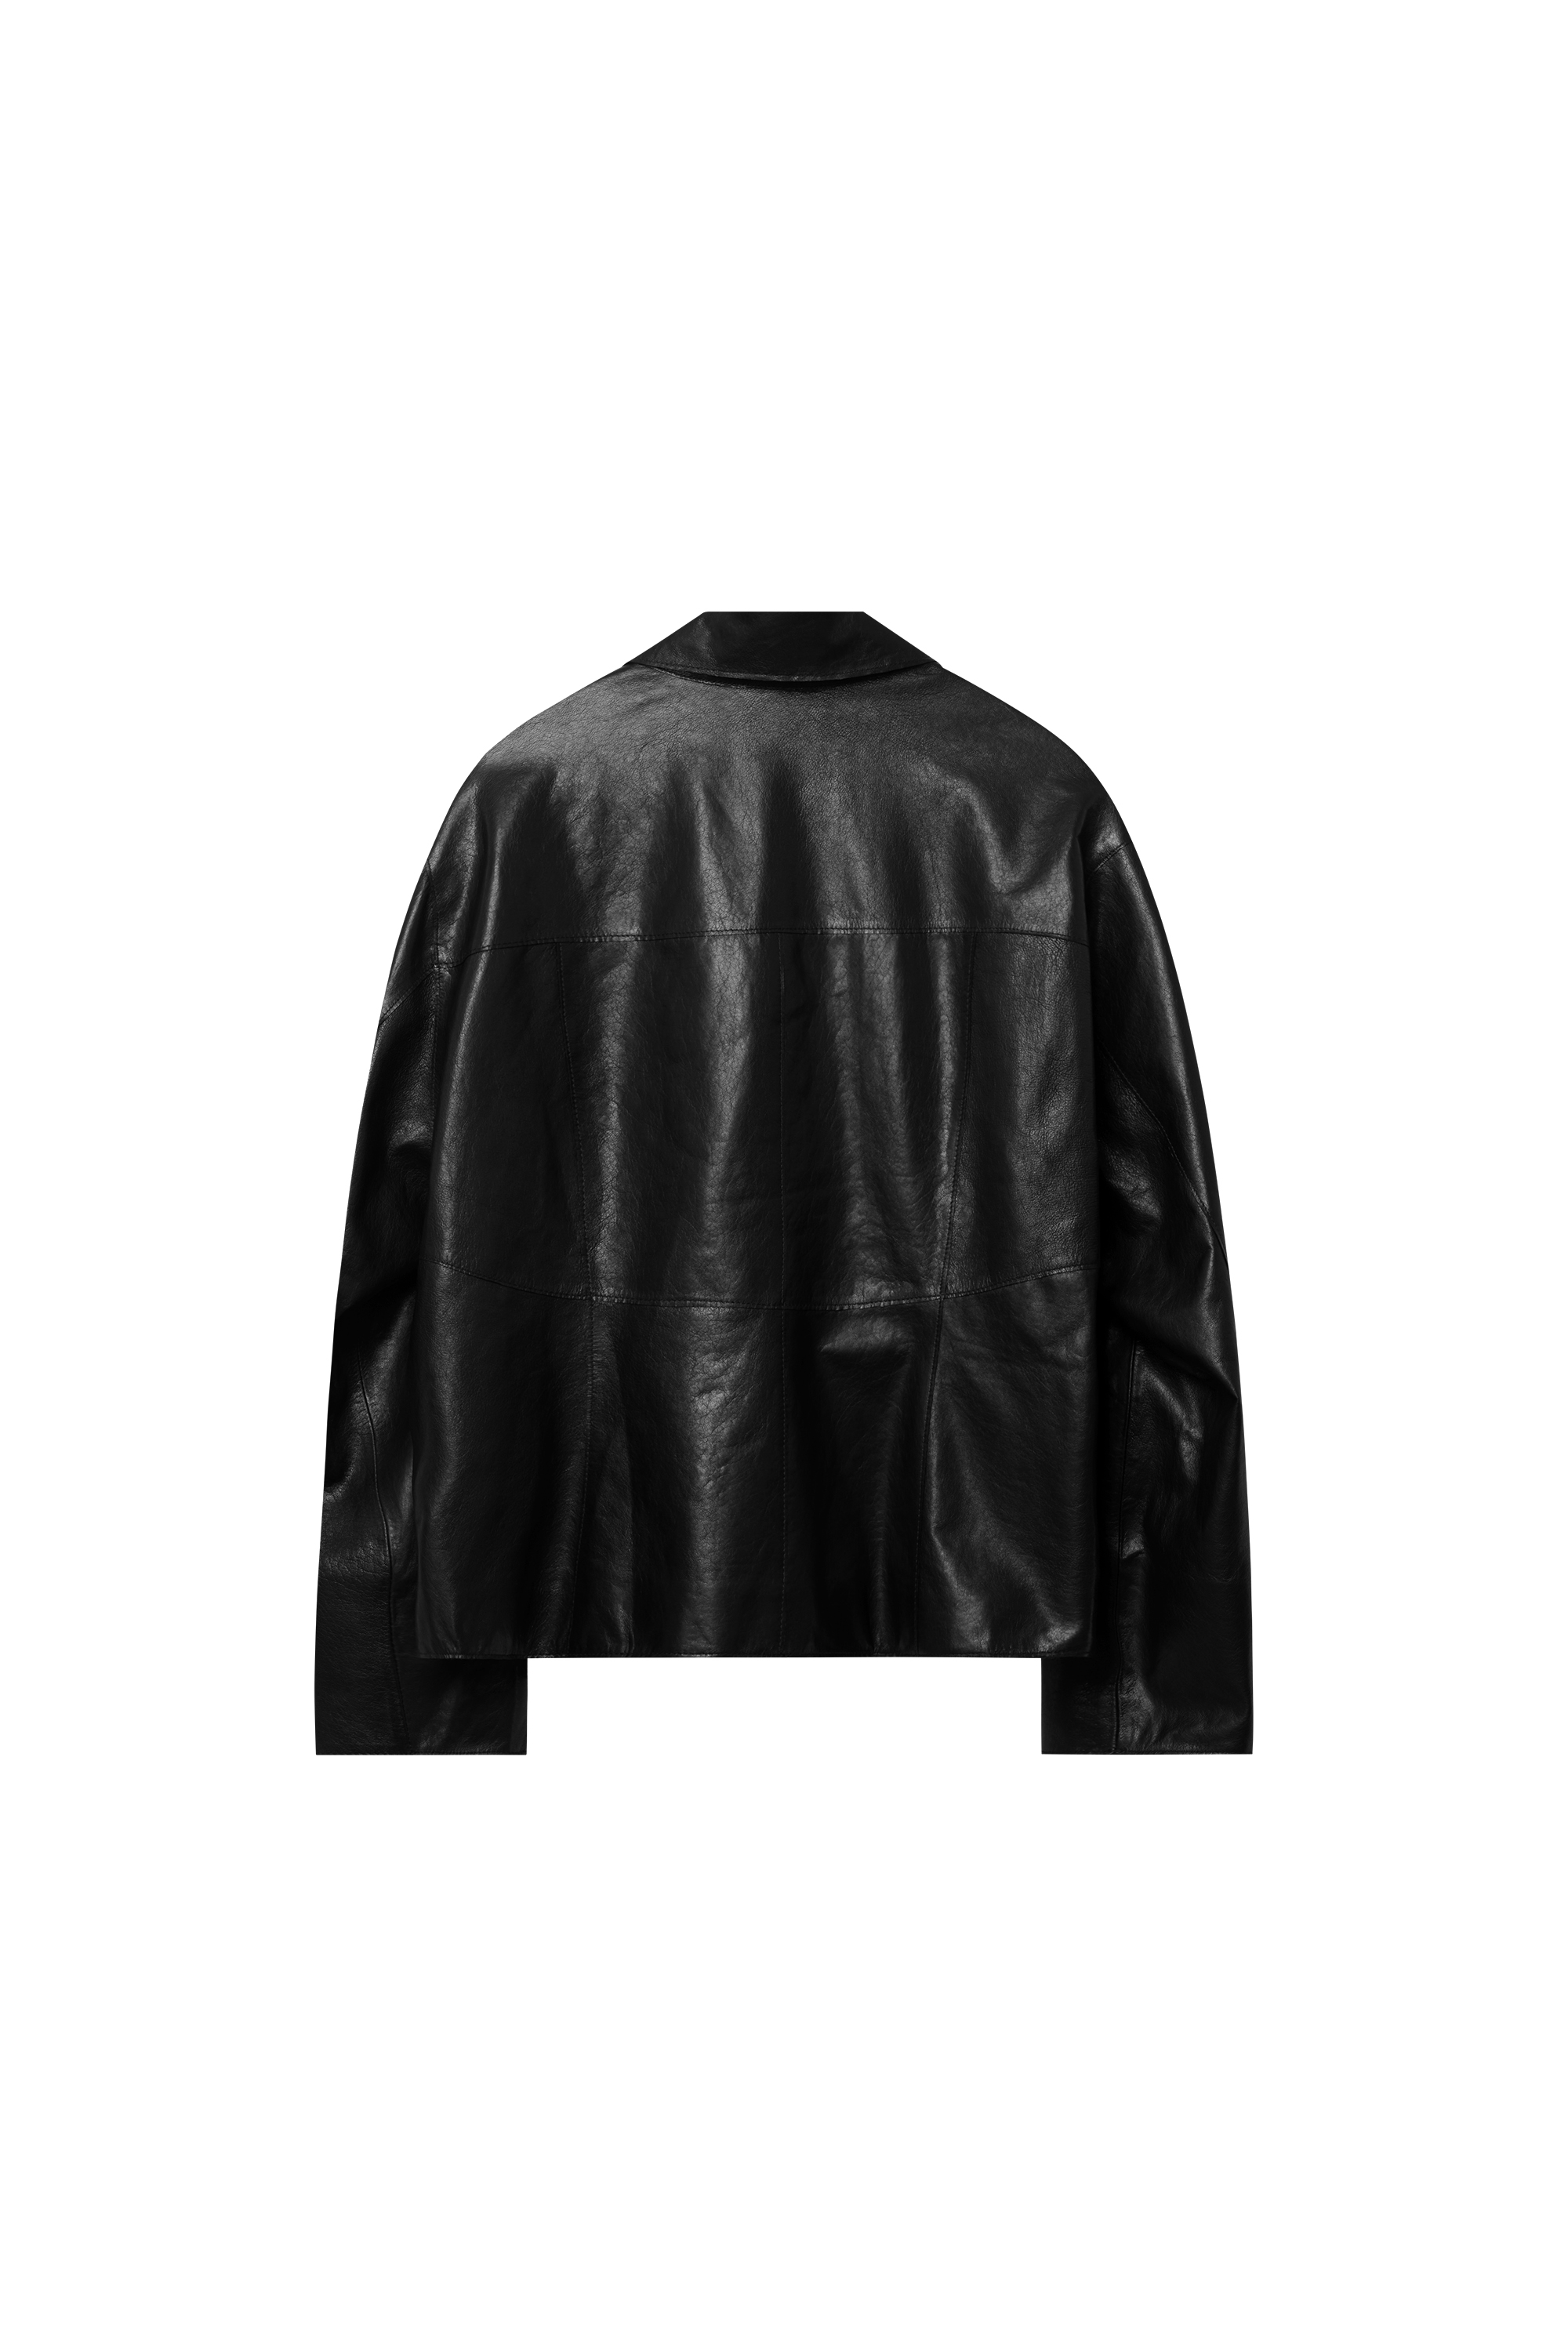 BEAN CURVED LINE LEATHER JACKET